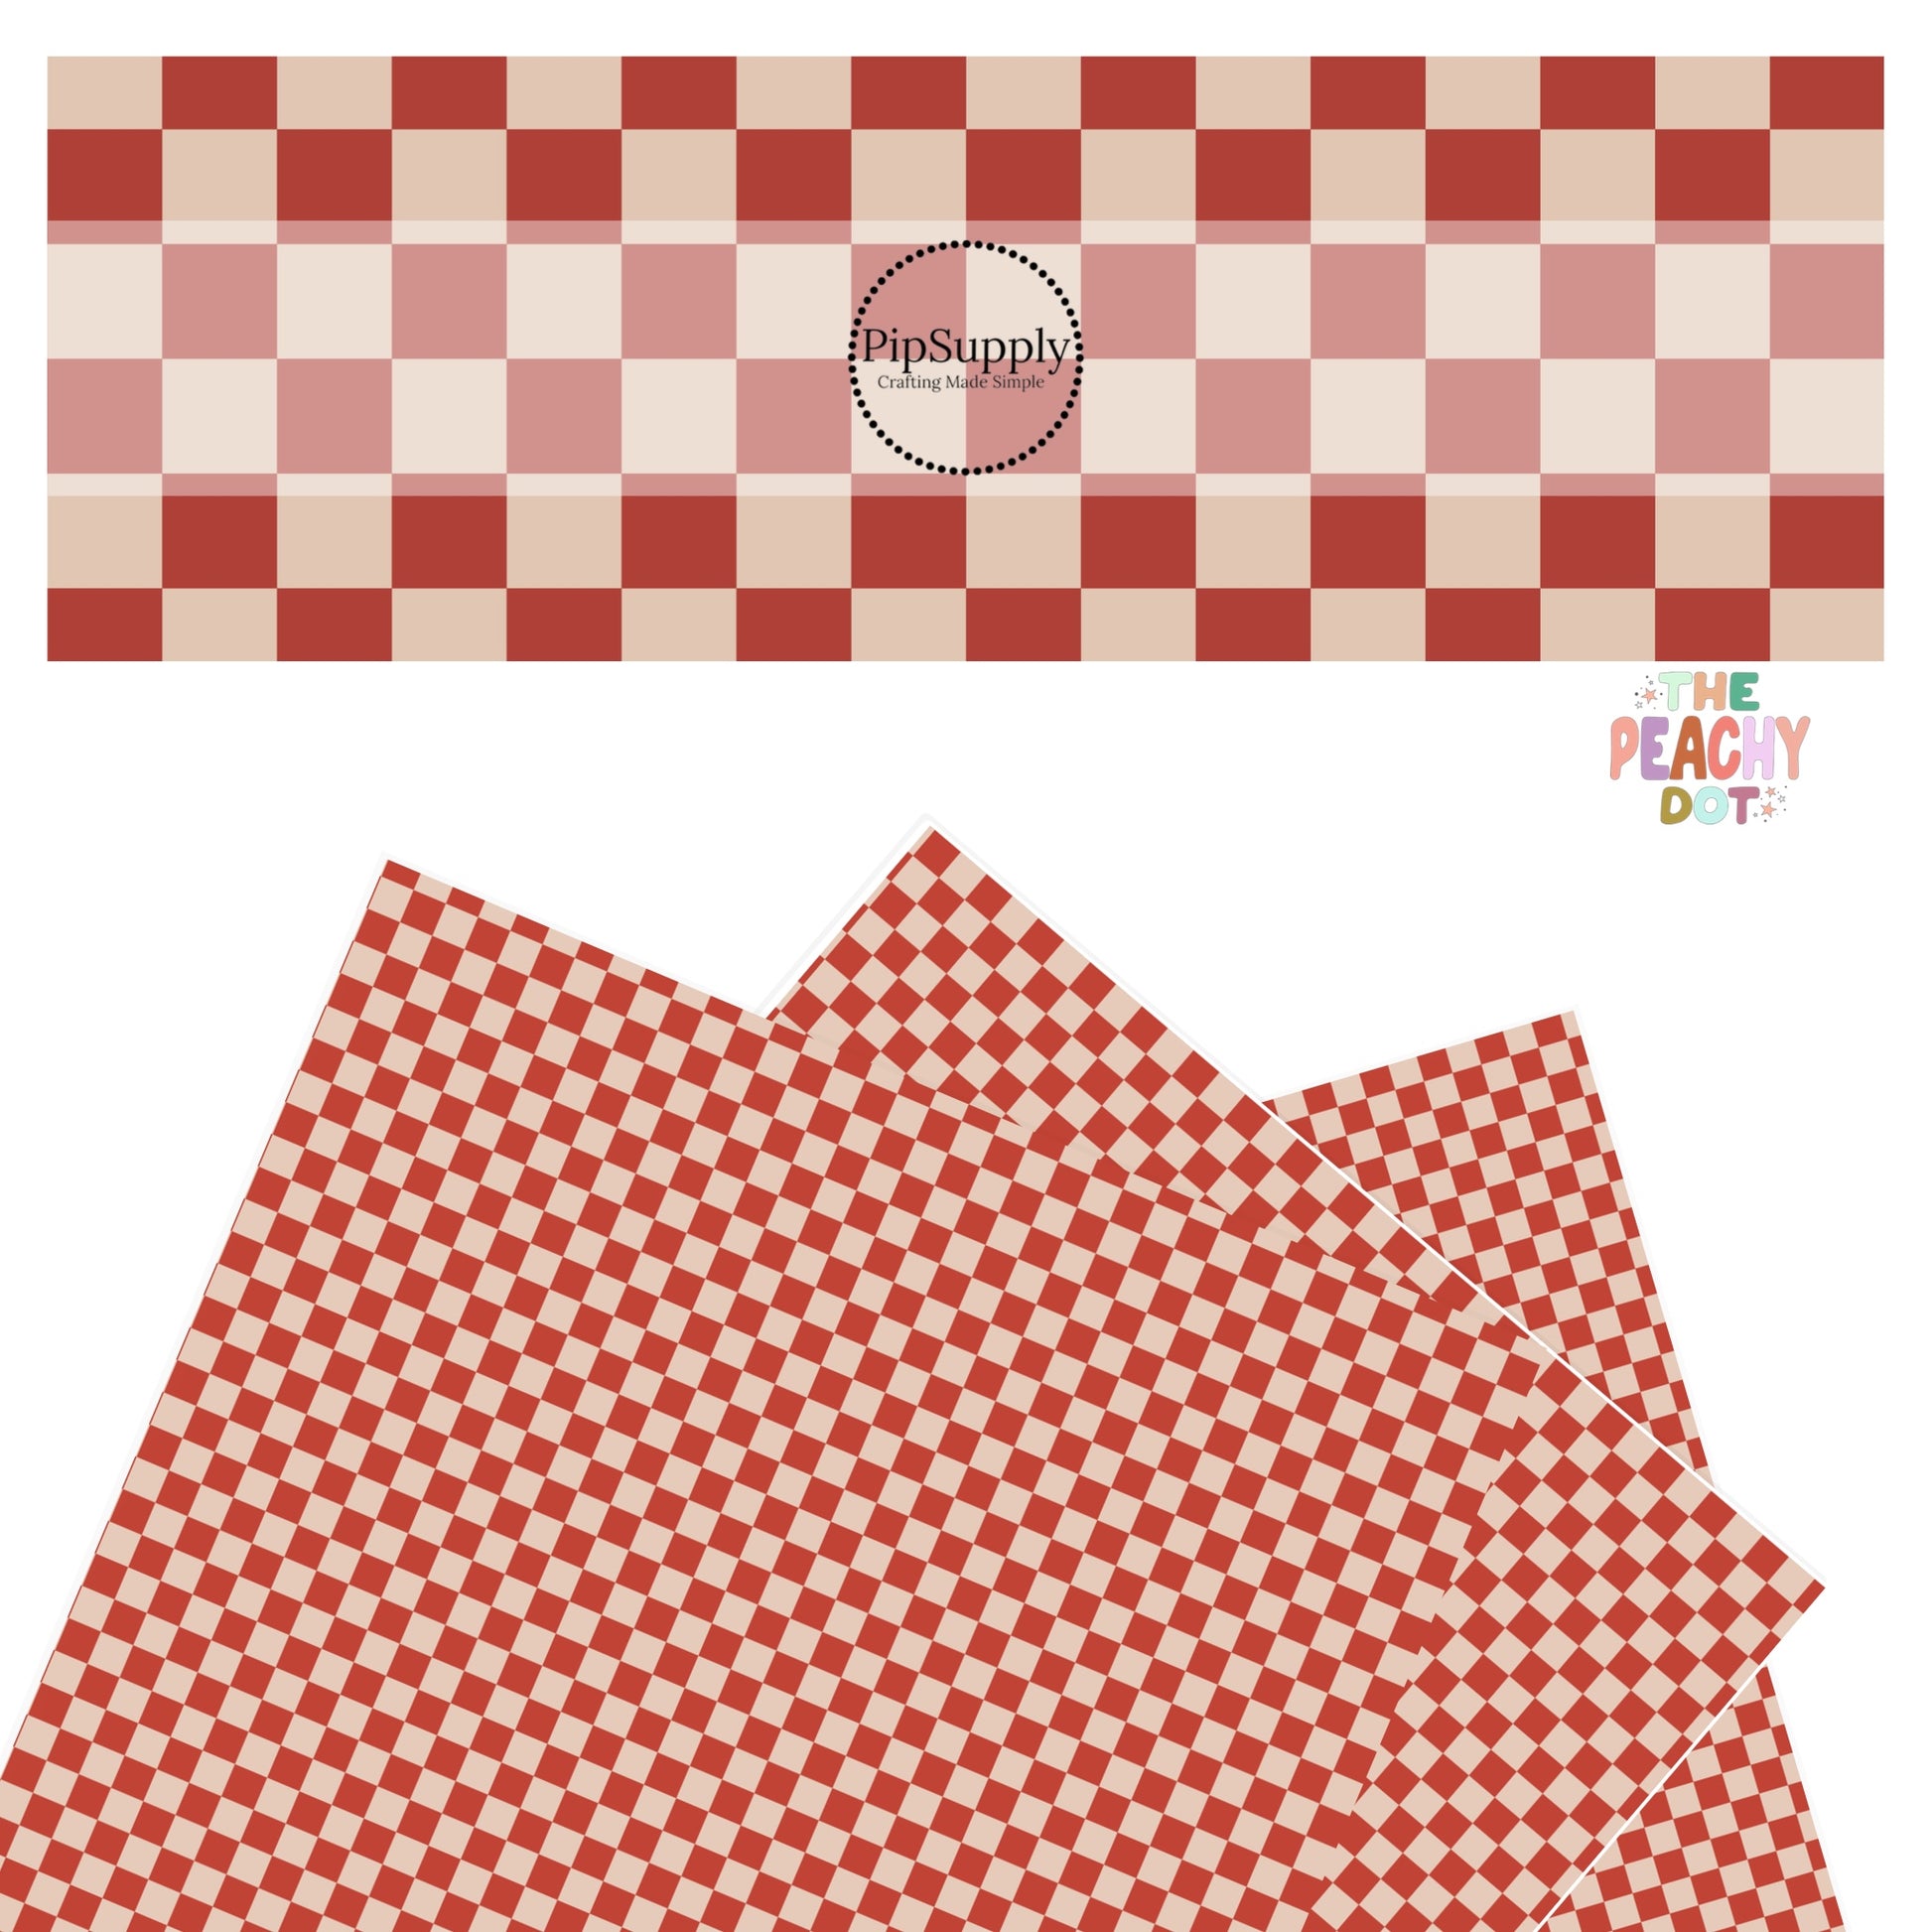 Red and cream checkered faux leather sheets